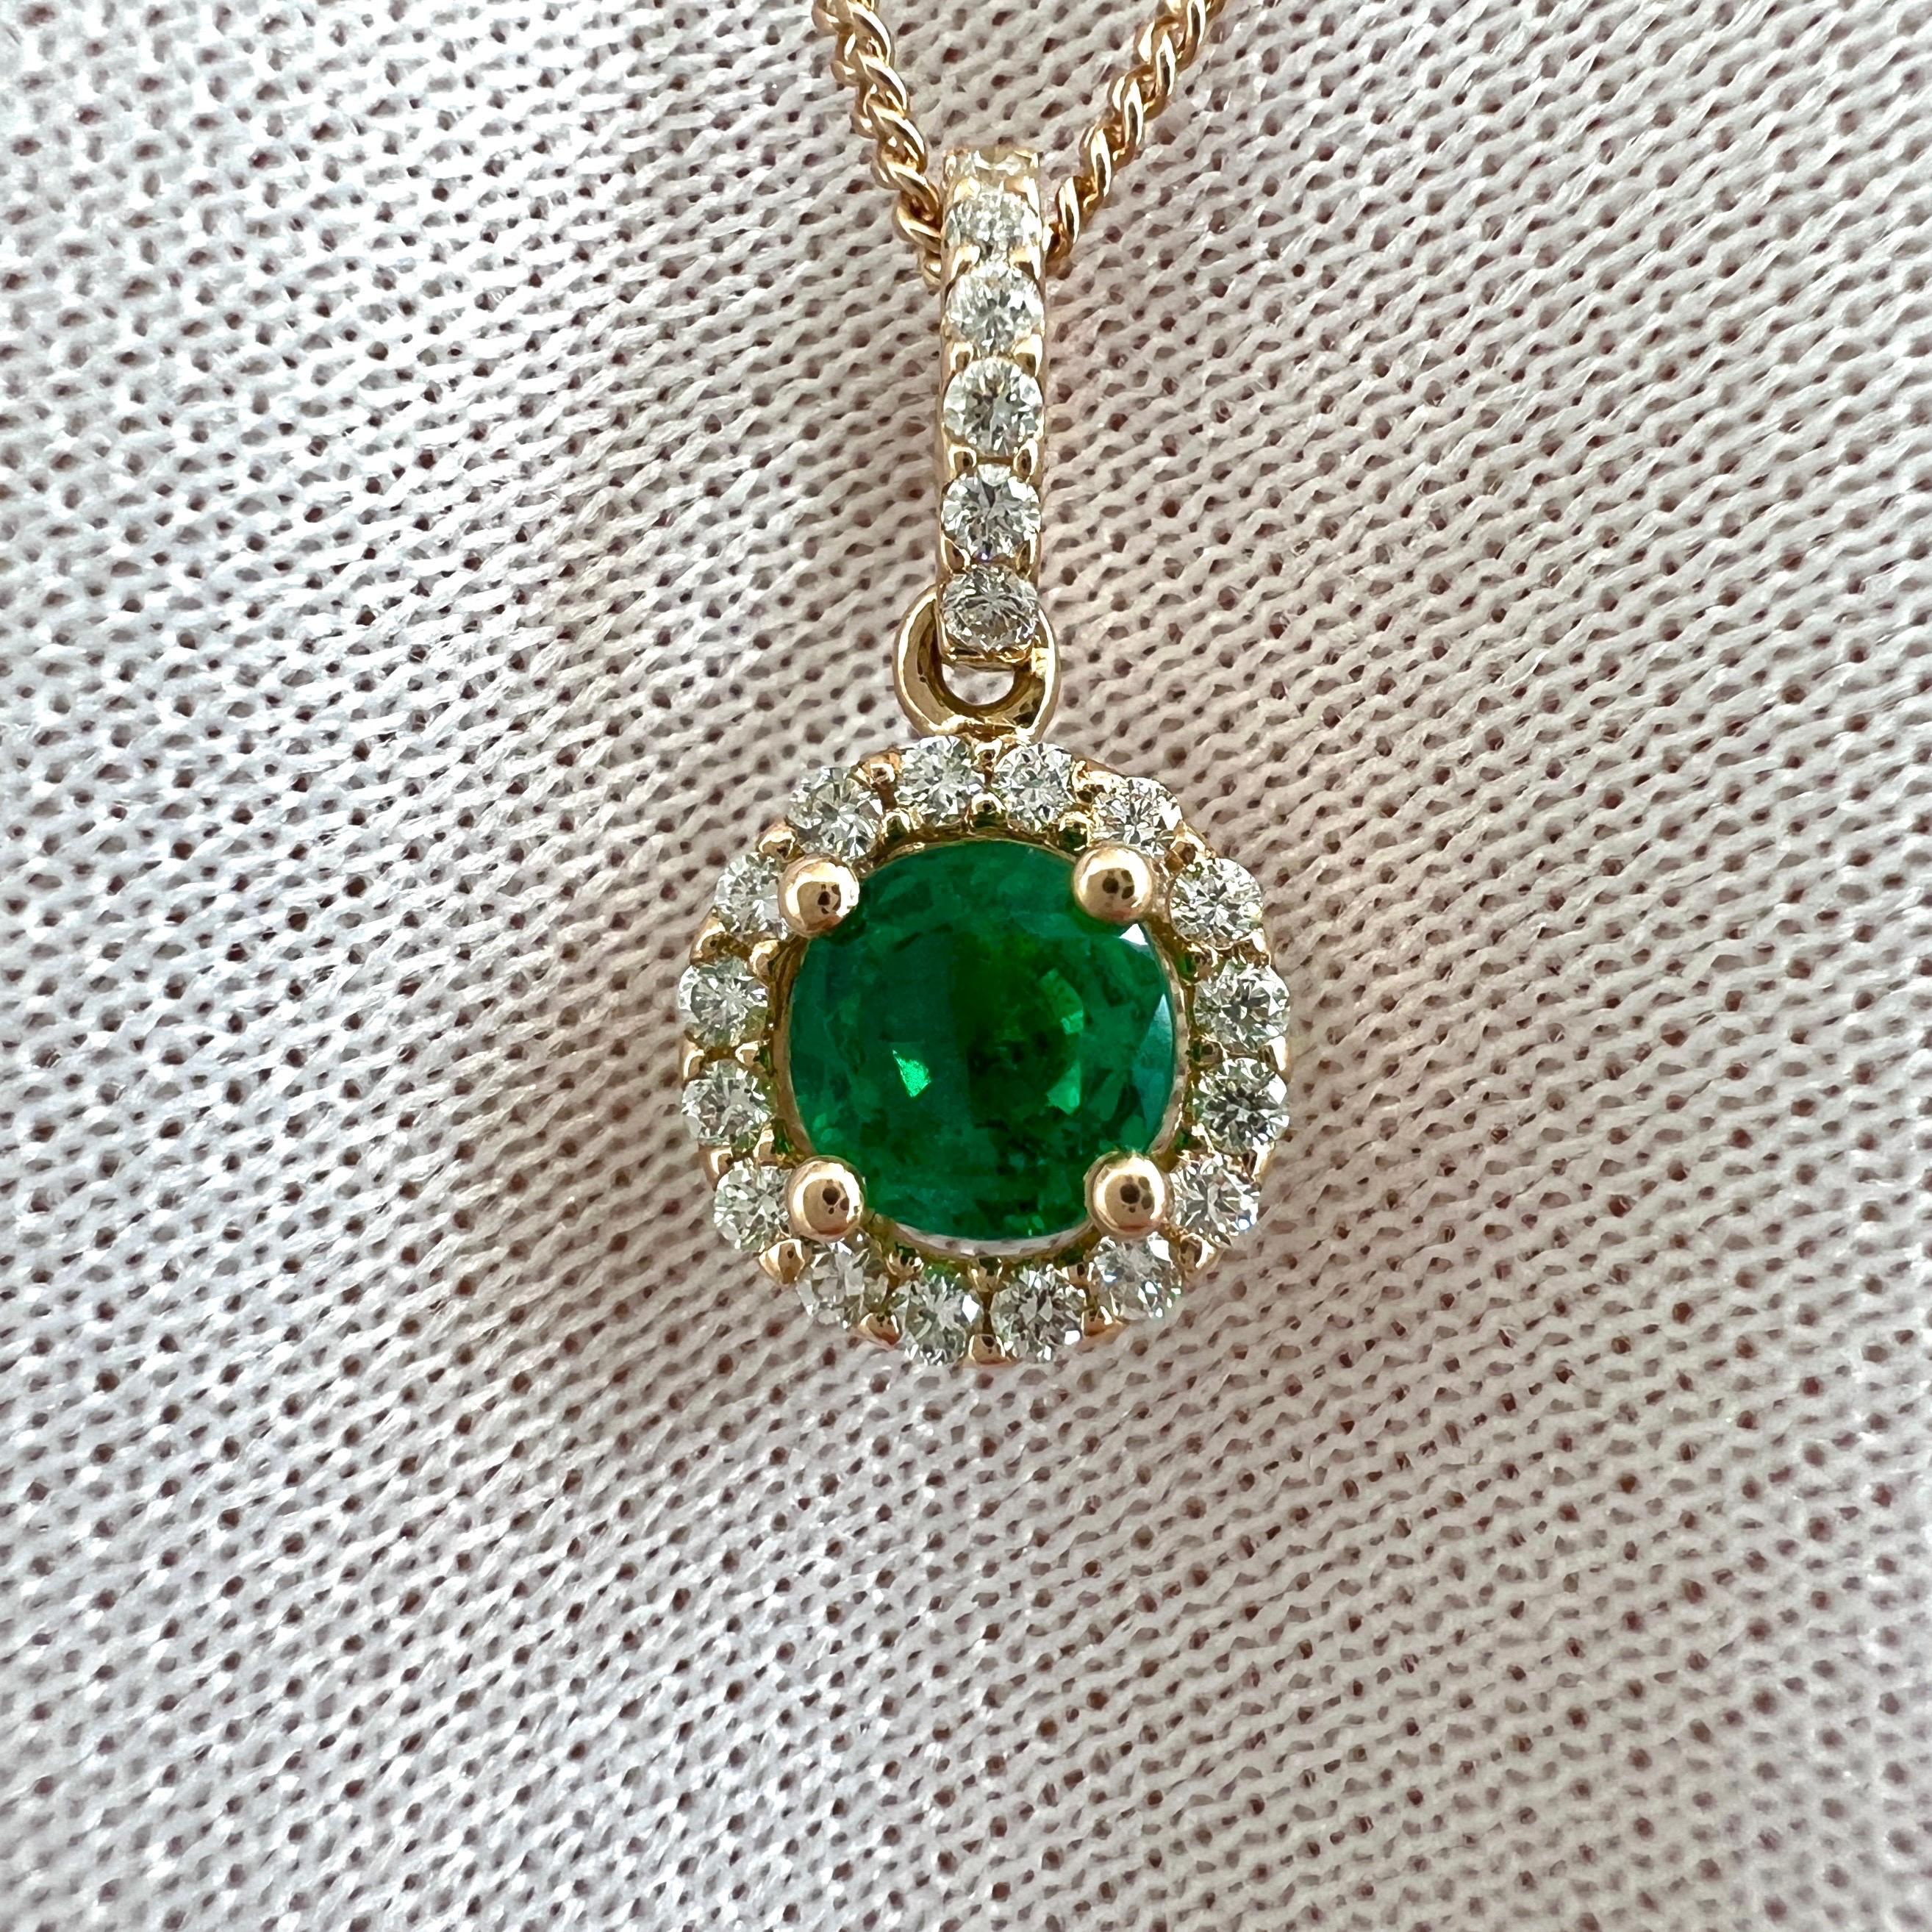 Fine Vivid Green Natural Emerald And Diamond 18k Rose Gold Round Halo Pendant

Top grade 5mm vivid green natural emerald with an excellent round cut and excellent clarity. Very clean stone. 
Set in a beautiful 18k rose gold halo pendant.

The